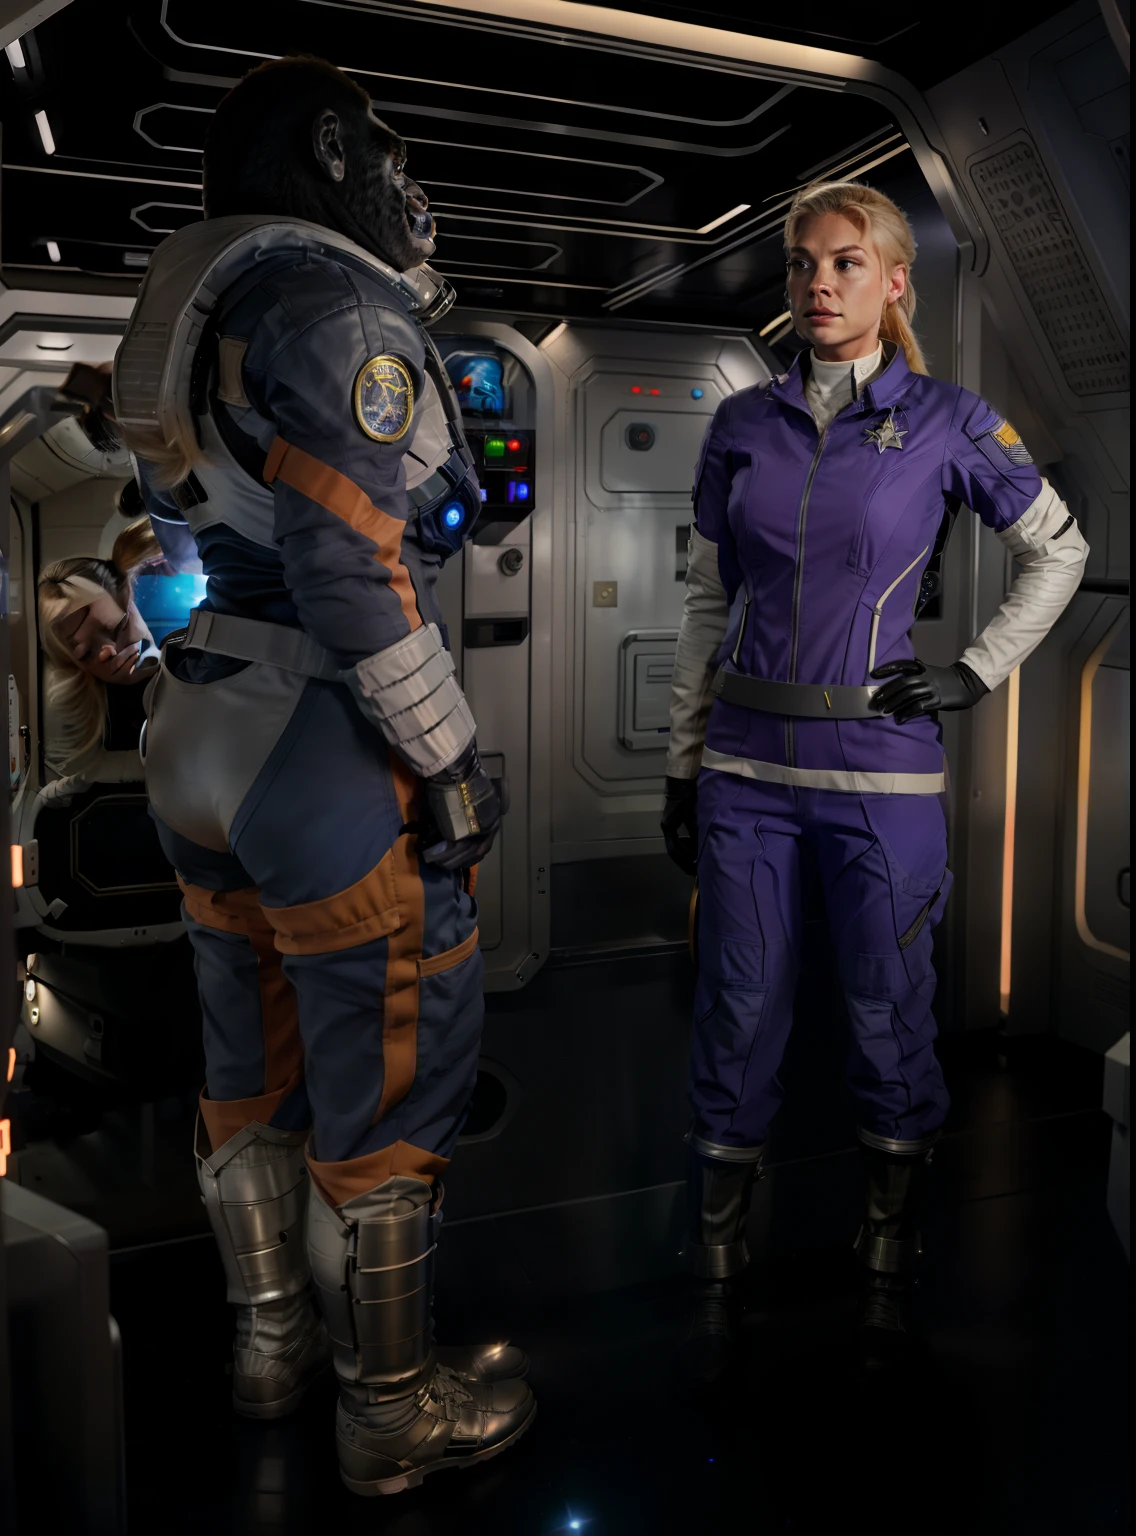 two sci-fi crew members in a starship corridor, starbase, starship, gorilla in a space suit talking to a female blond captain, female blond woman wiht her hands on her hips talking to an ape in a space suit